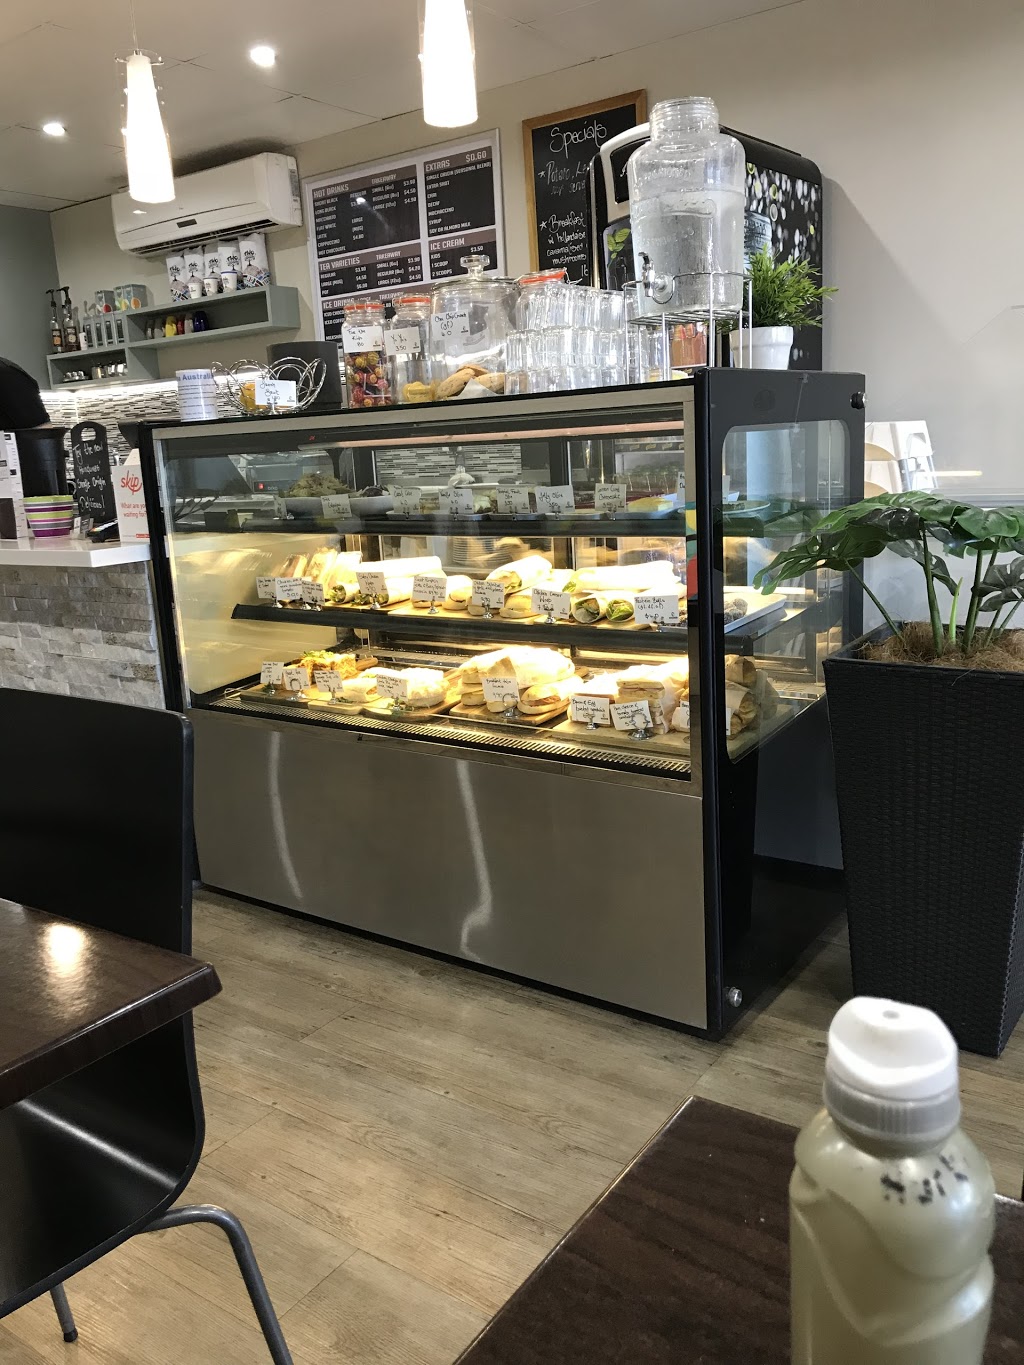 Espresso District | store | 2/1172 Geelong Rd, Mount Clear VIC 3350, Australia